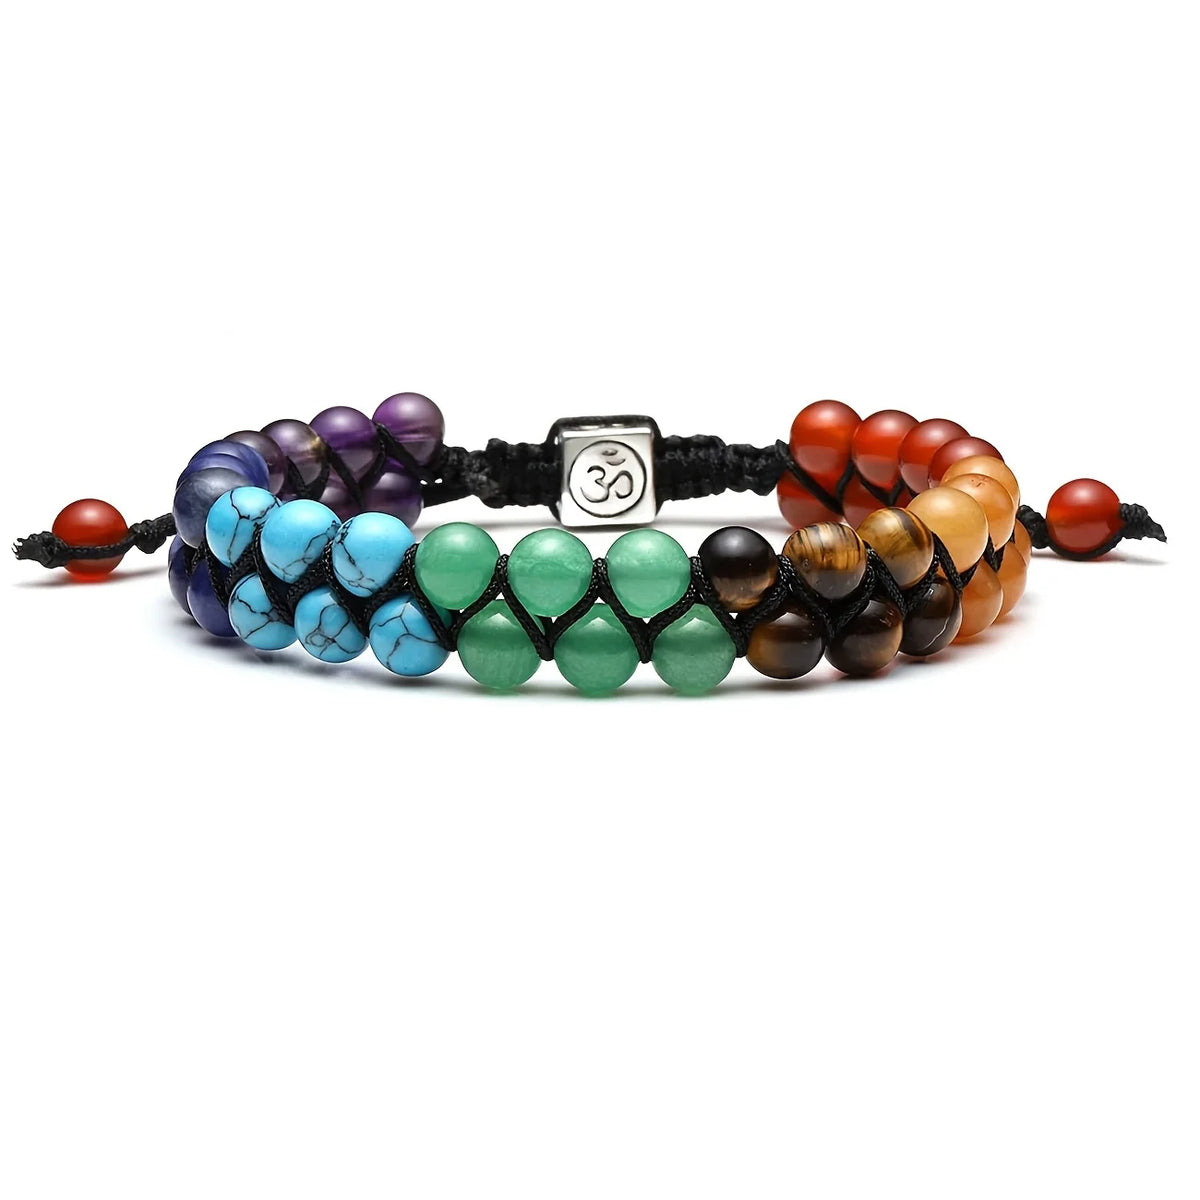 Natural Stone Bead Bracelet for the 7 Chakras - Balance and Well-Being